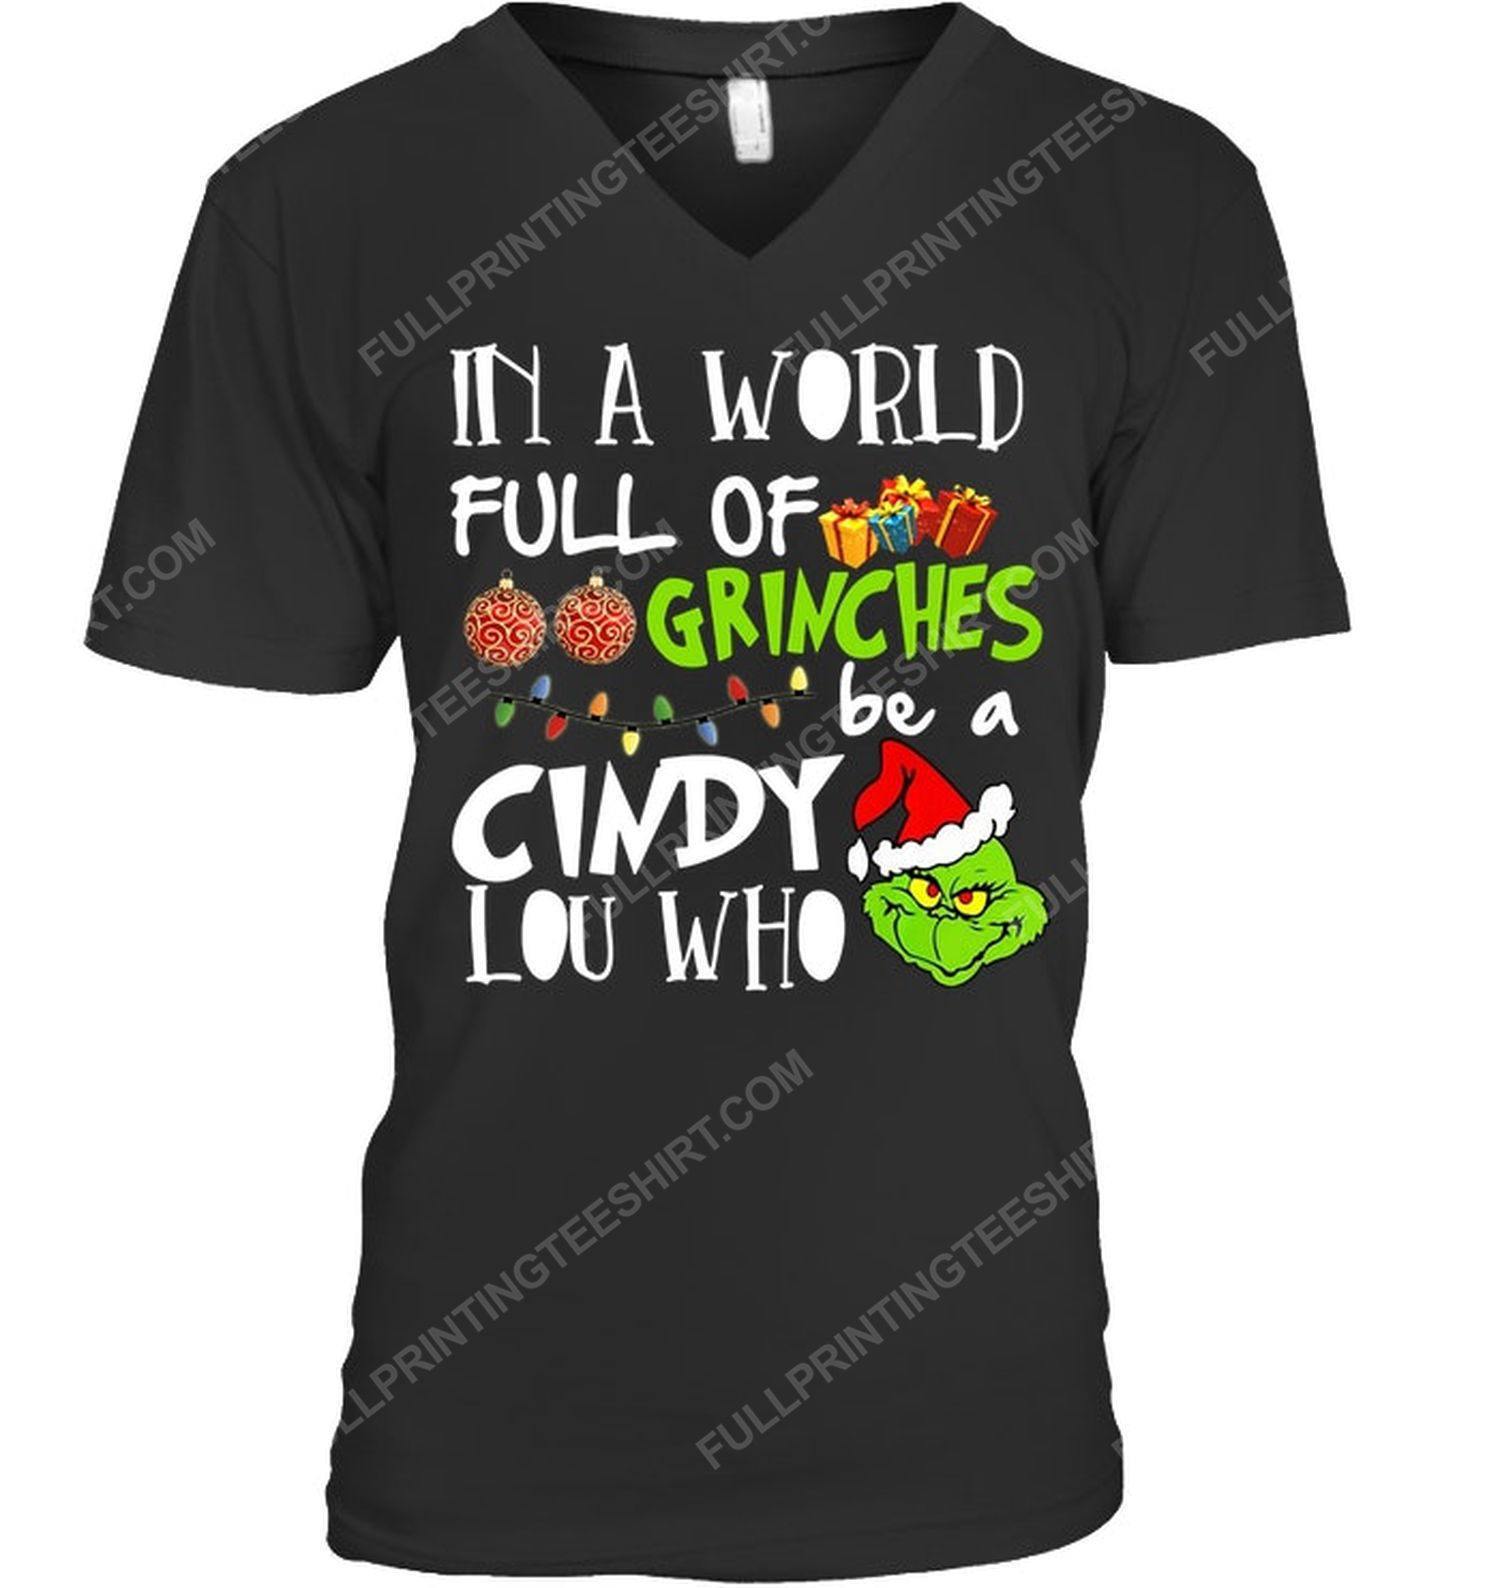 In a world grinches be a cindy lou who v-neck